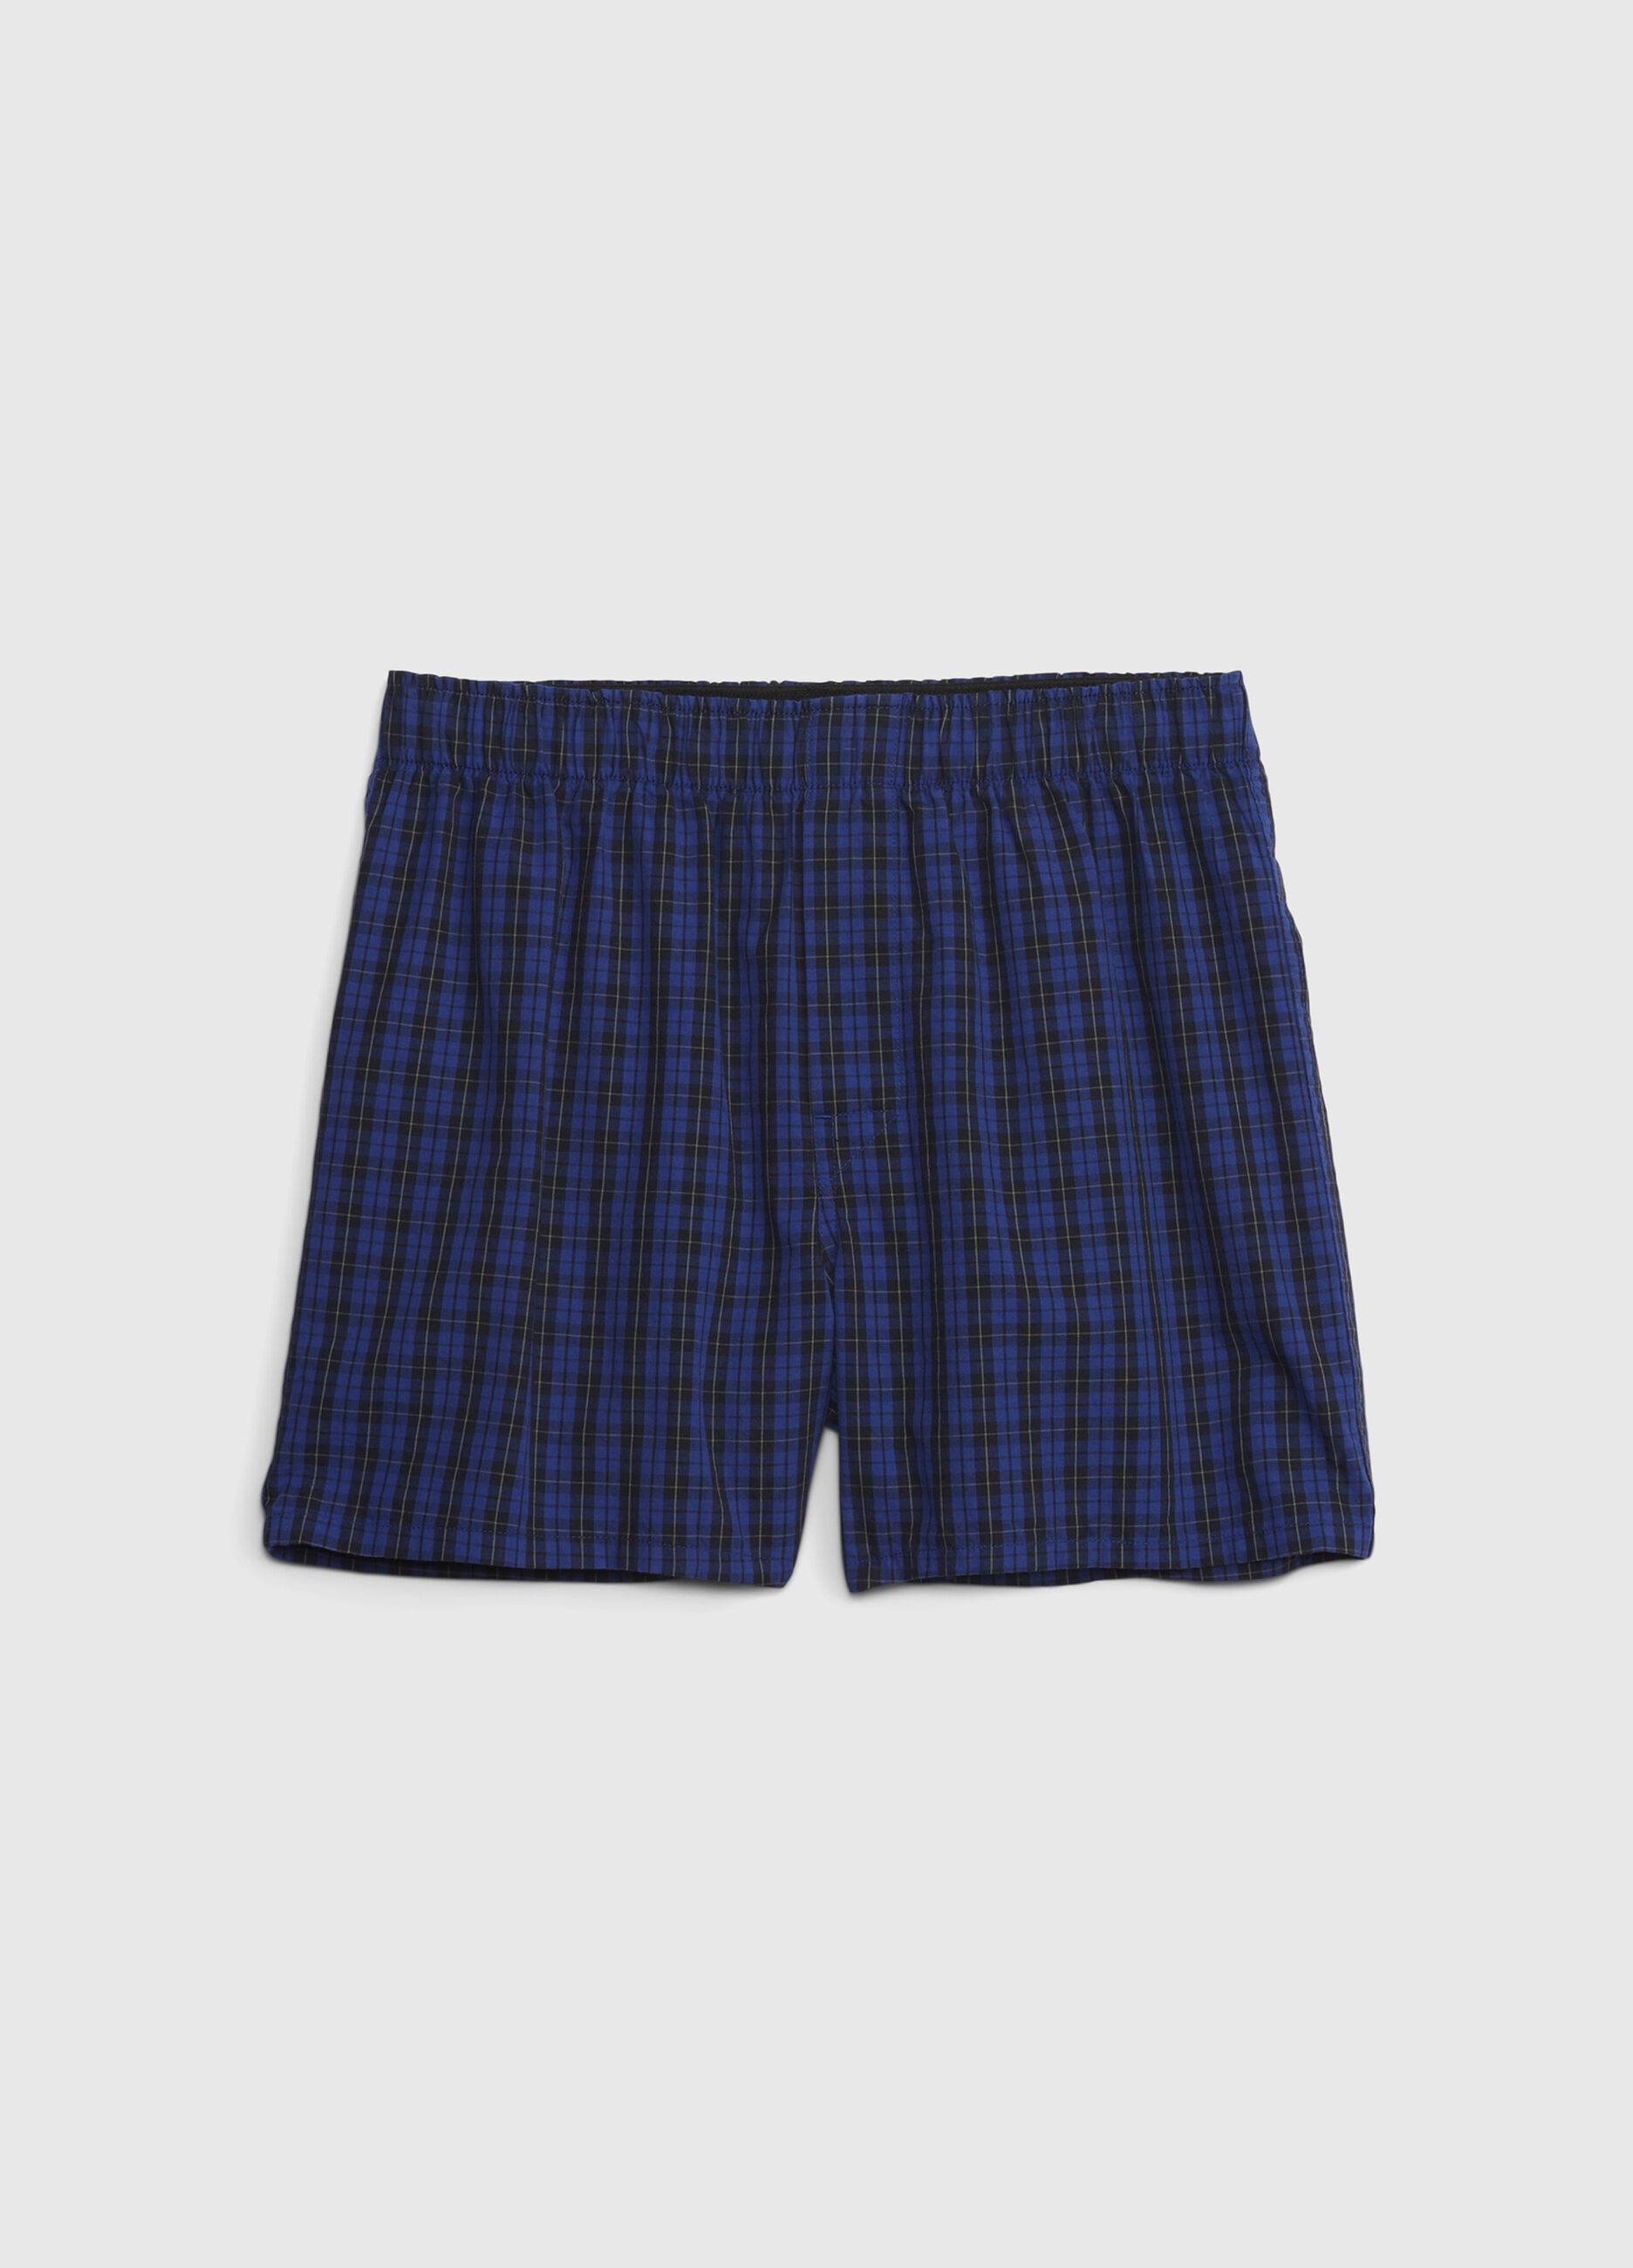 Cotton boxer shorts with check pattern